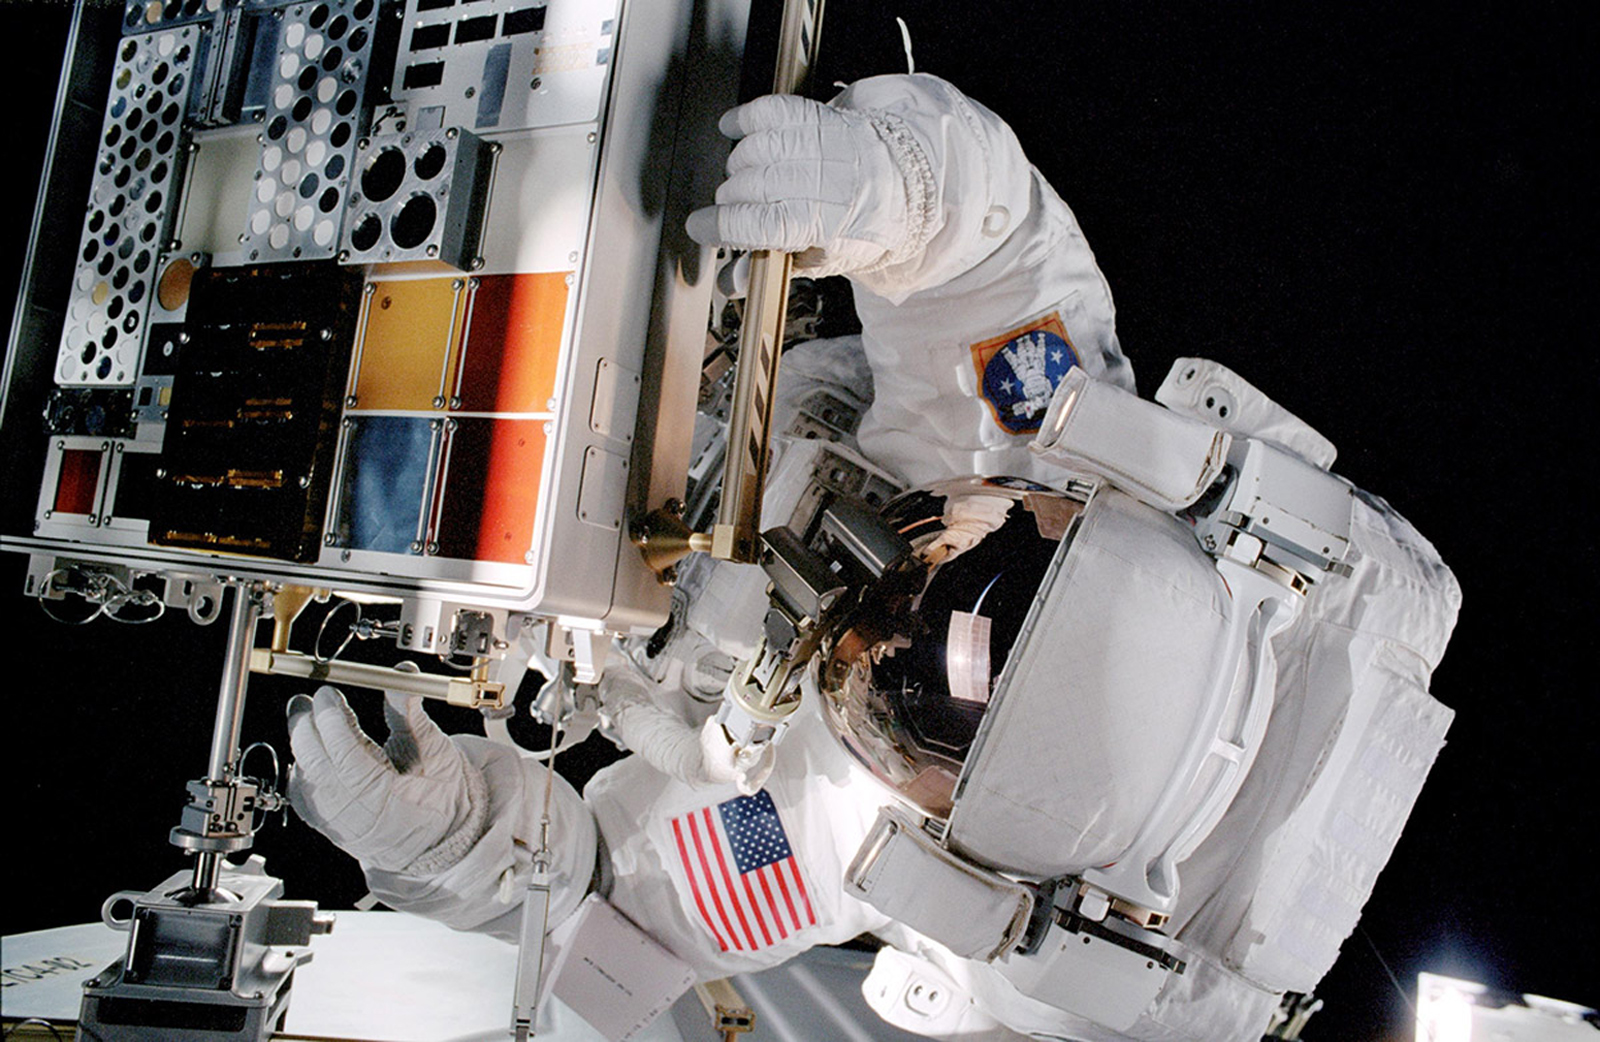 An astronaut mounts a previous version of the MISSE hardware to the International Space Station during a spacewalk.